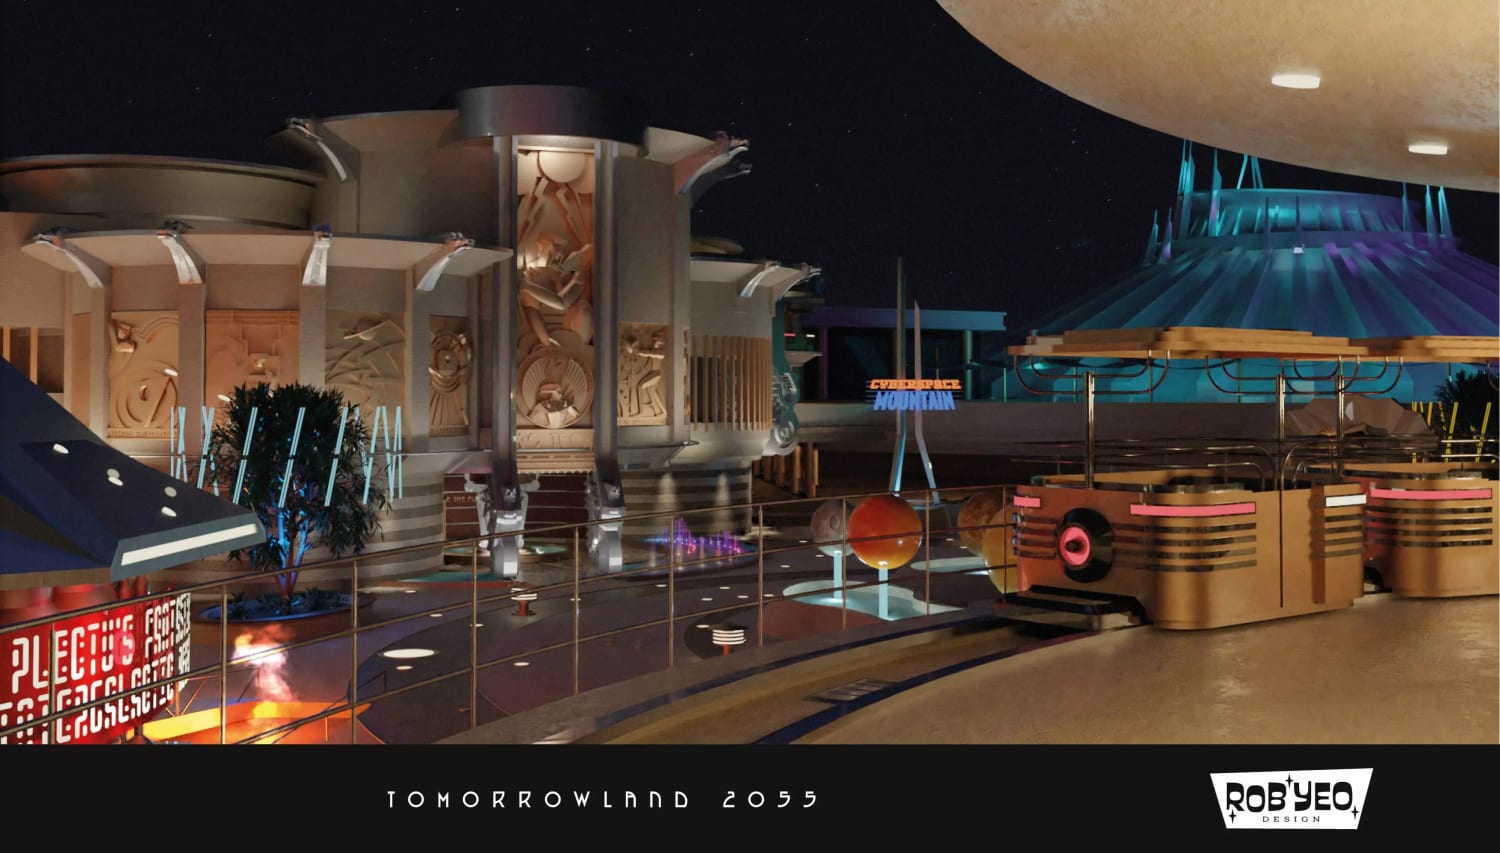 I spent the past few months modelling the never-built 1990s overhaul for Disneyland's Tomorrowland, based on blueprints and concept art.